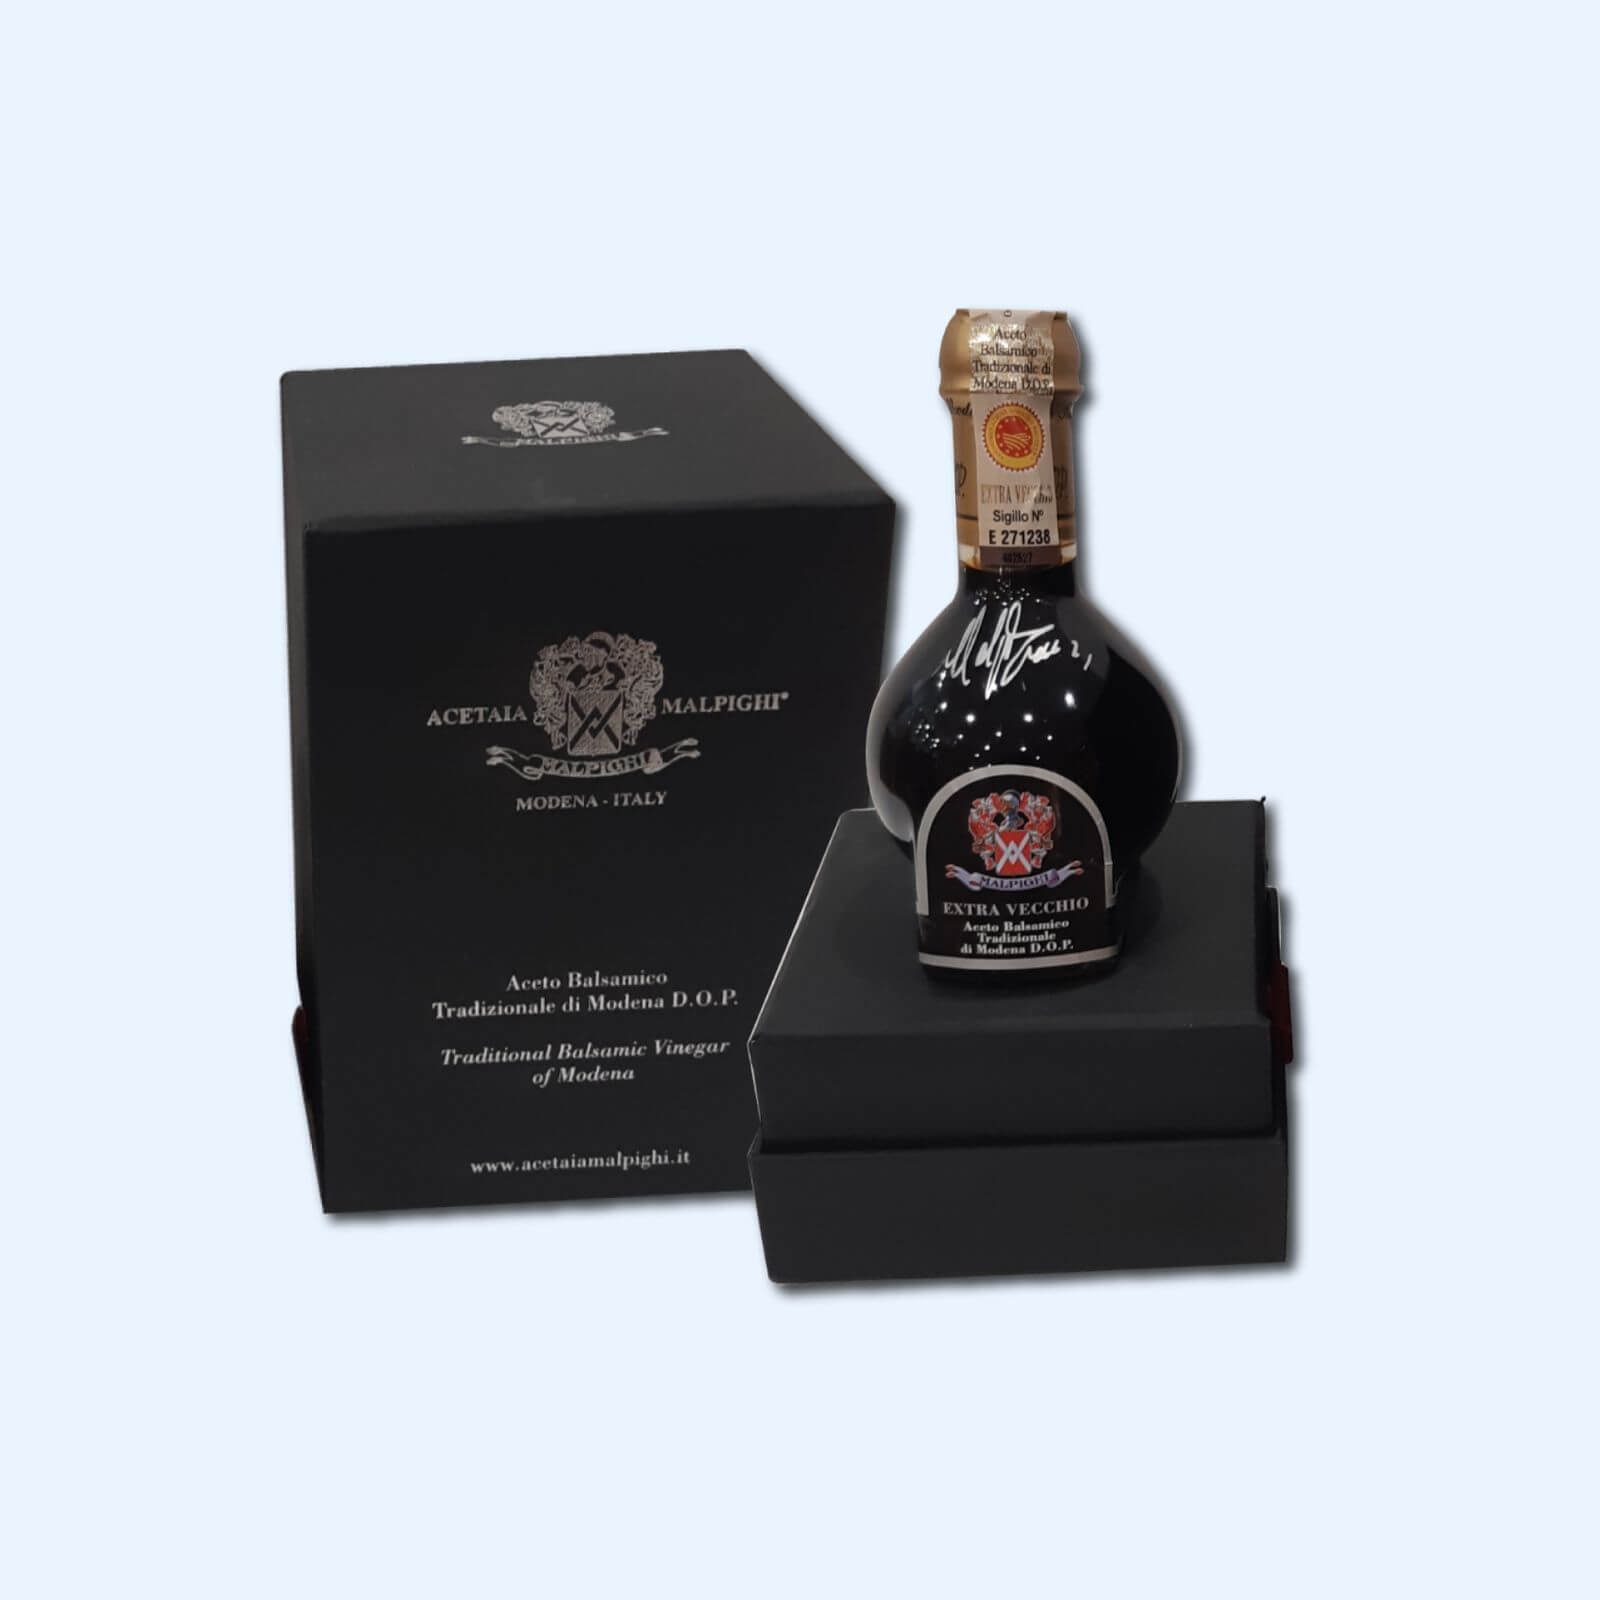 Balsamic vinegar from Modena extra vecchio special packaging available at da Caio food shop in Bellagio